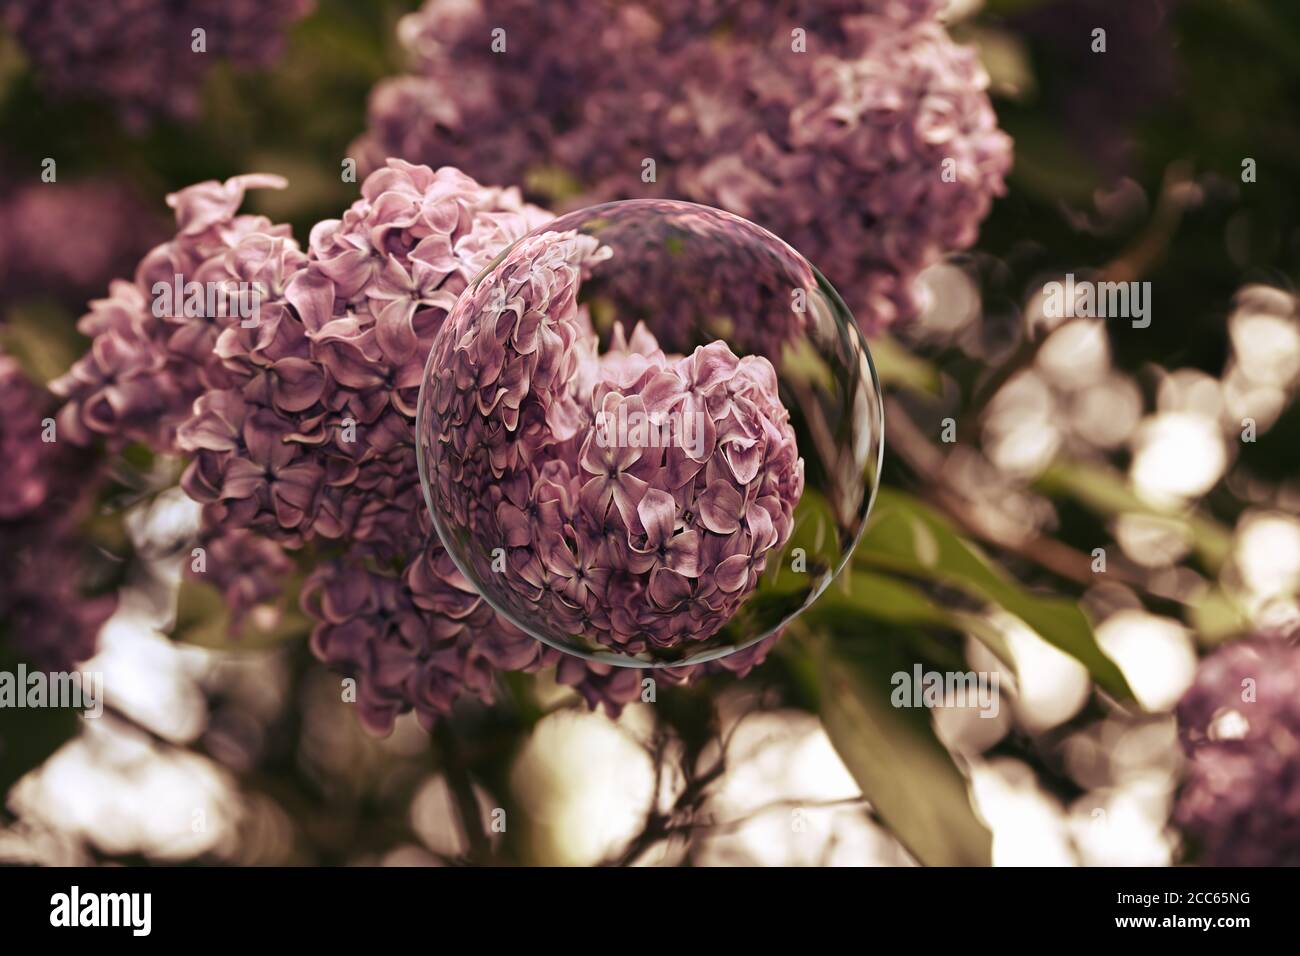 Lilac, syringa flower in closeup. Creative crystal ball with 3D effect. Stock Photo